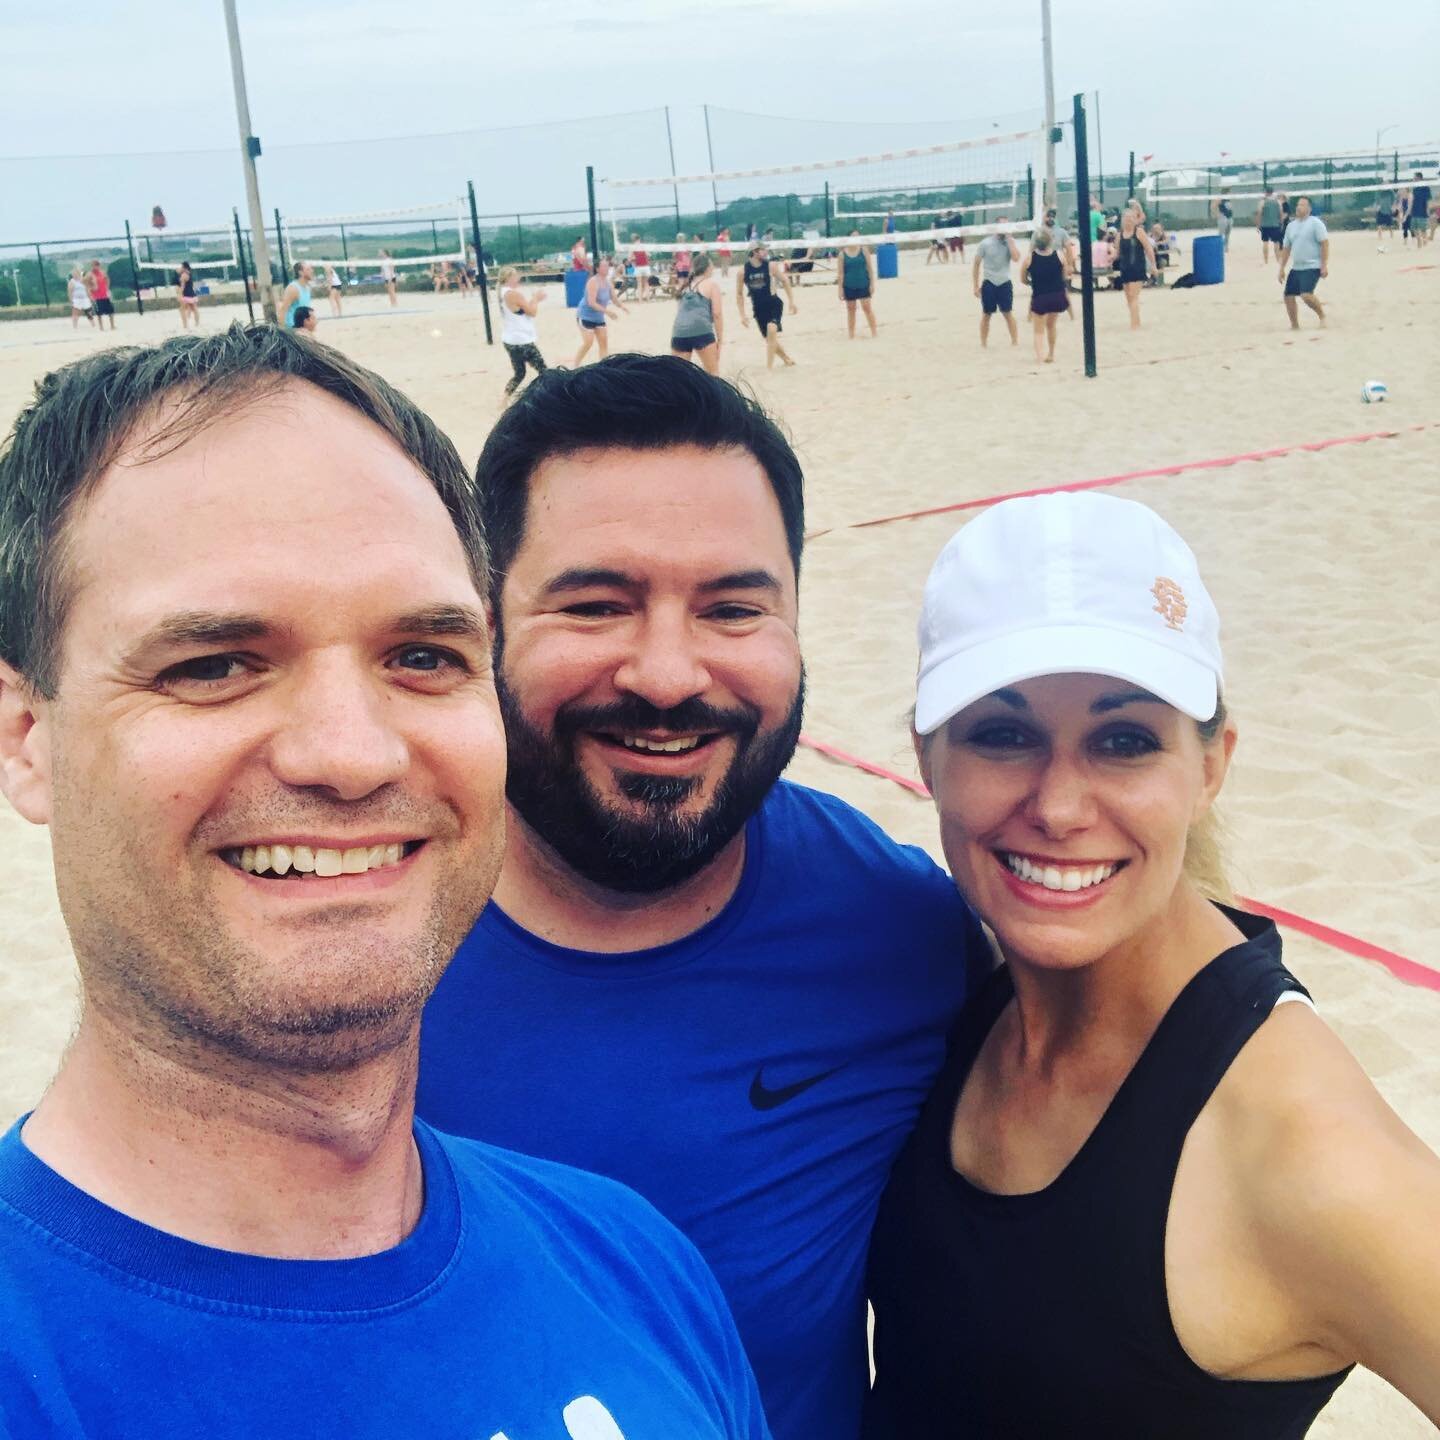 Our first and maybe last time playing sand volleyball! #summer #makingmemories #sandvolleyball #friends @themarkomaha